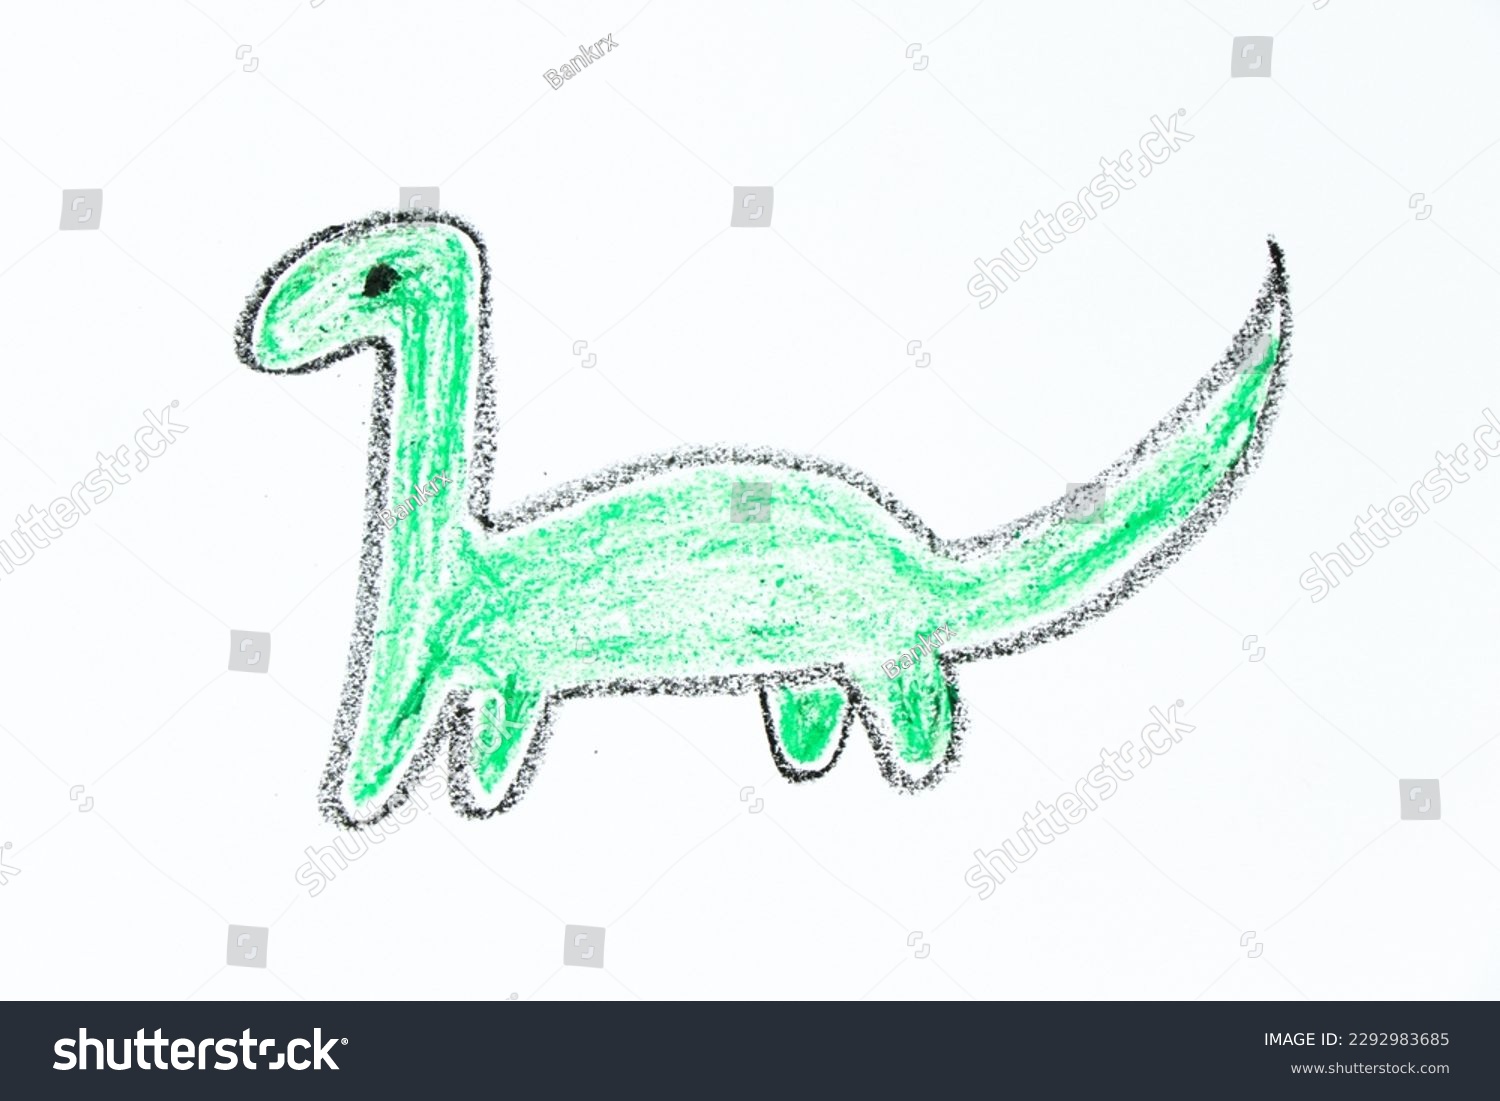 Green color oil pastel hand drawing in dinosaur (brachiosaurus) shape on white paper background #2292983685